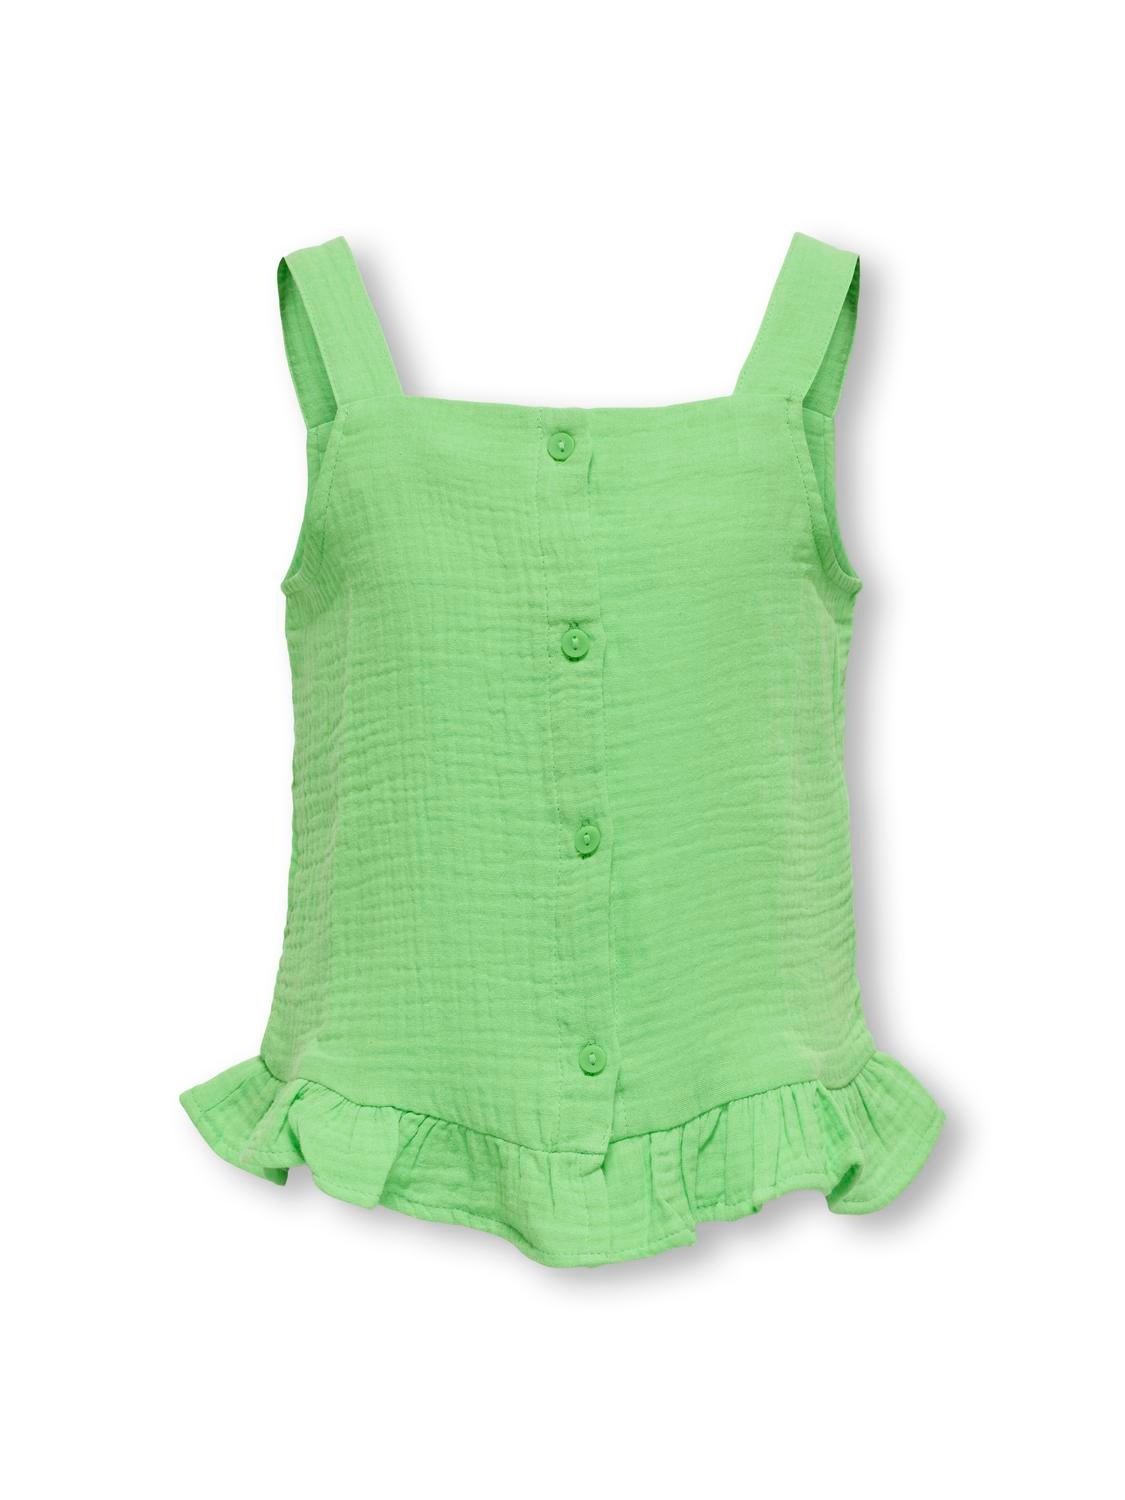 ONLY Top With Frill Trim -Summer Green - 15293678